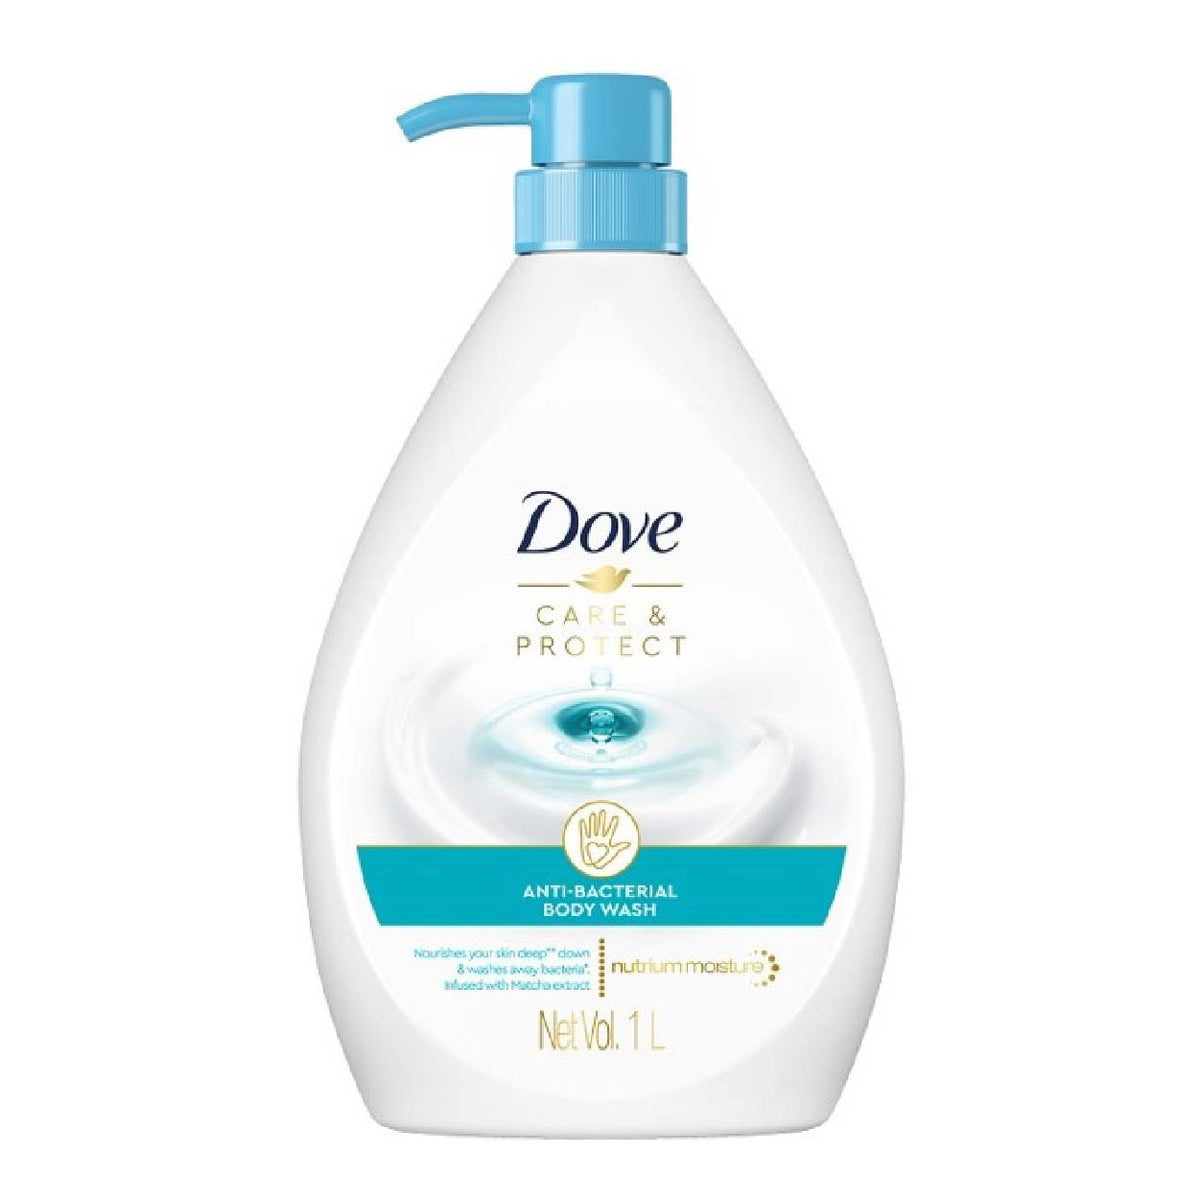 Dove Nourishing Milk Body Wash 240ml Pre-filled Bottle with Pump, Case of  24